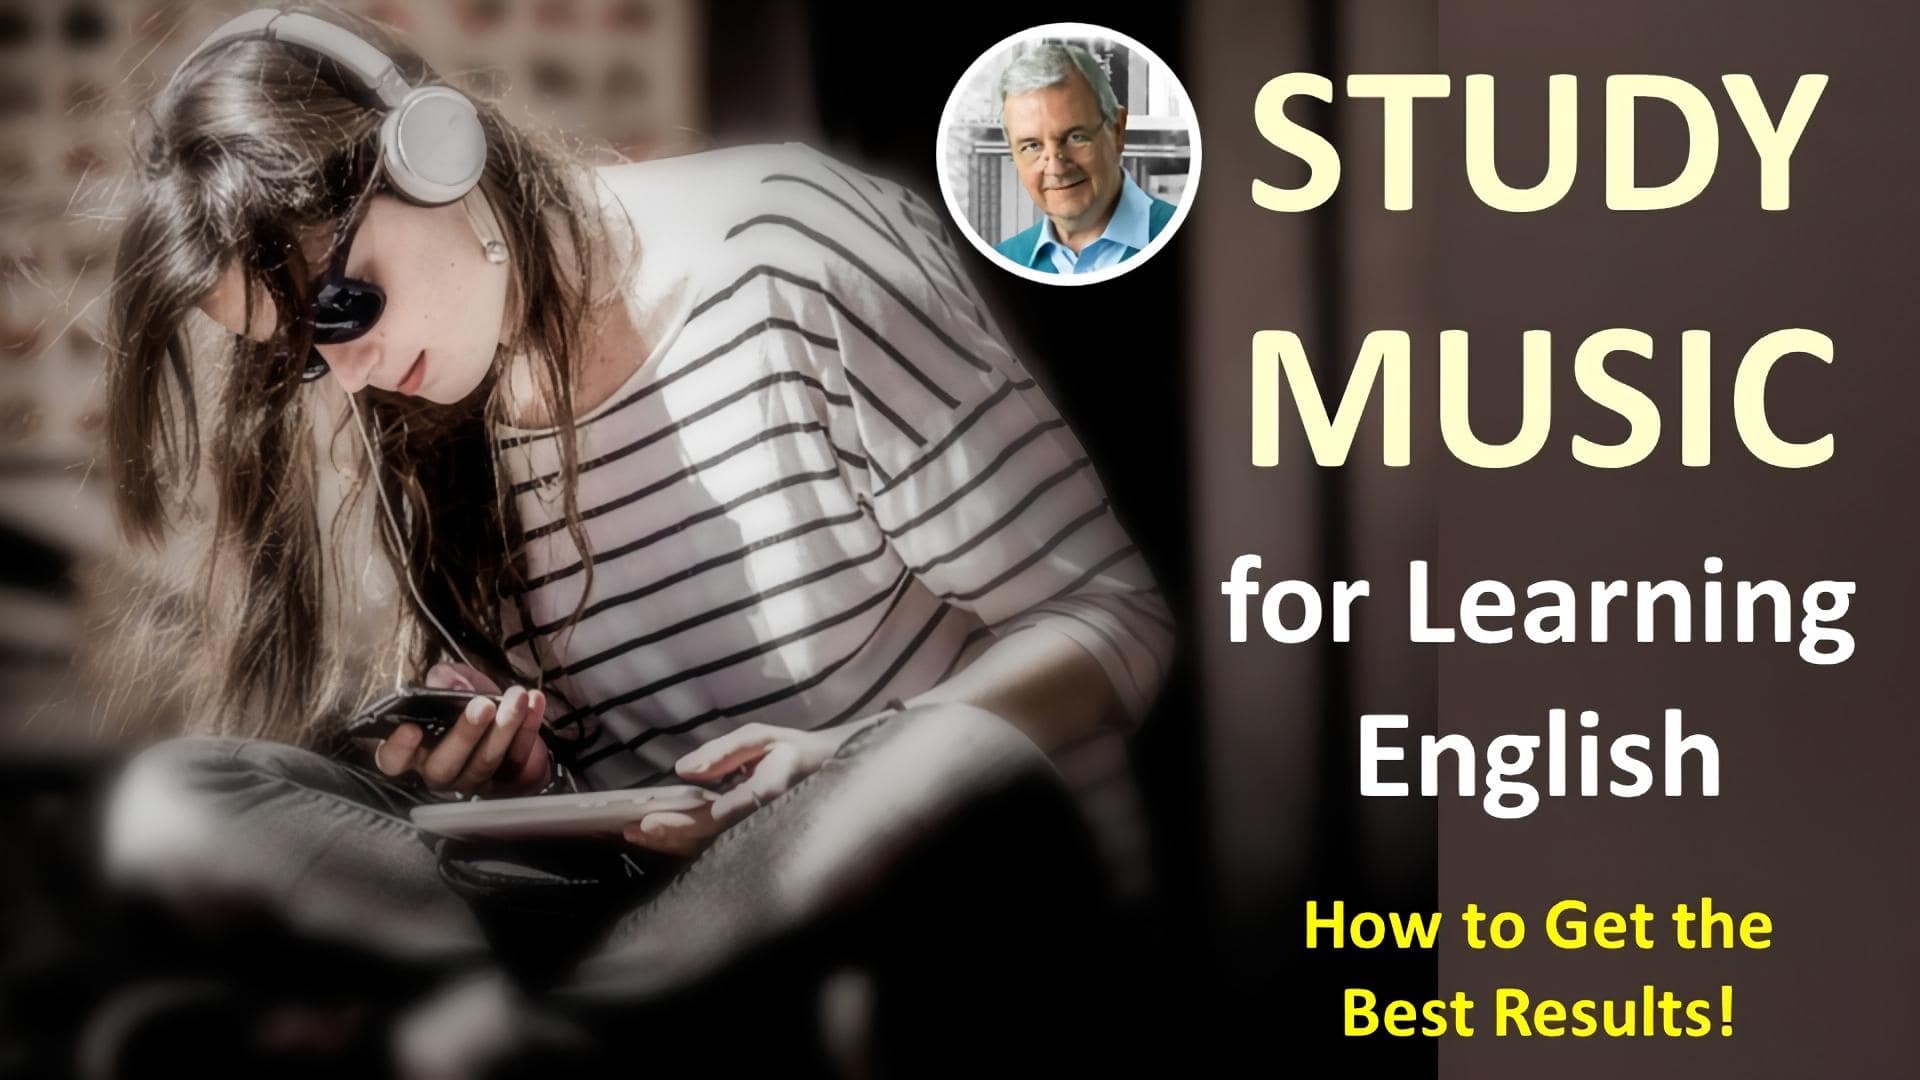 study music to concentrate - learn English